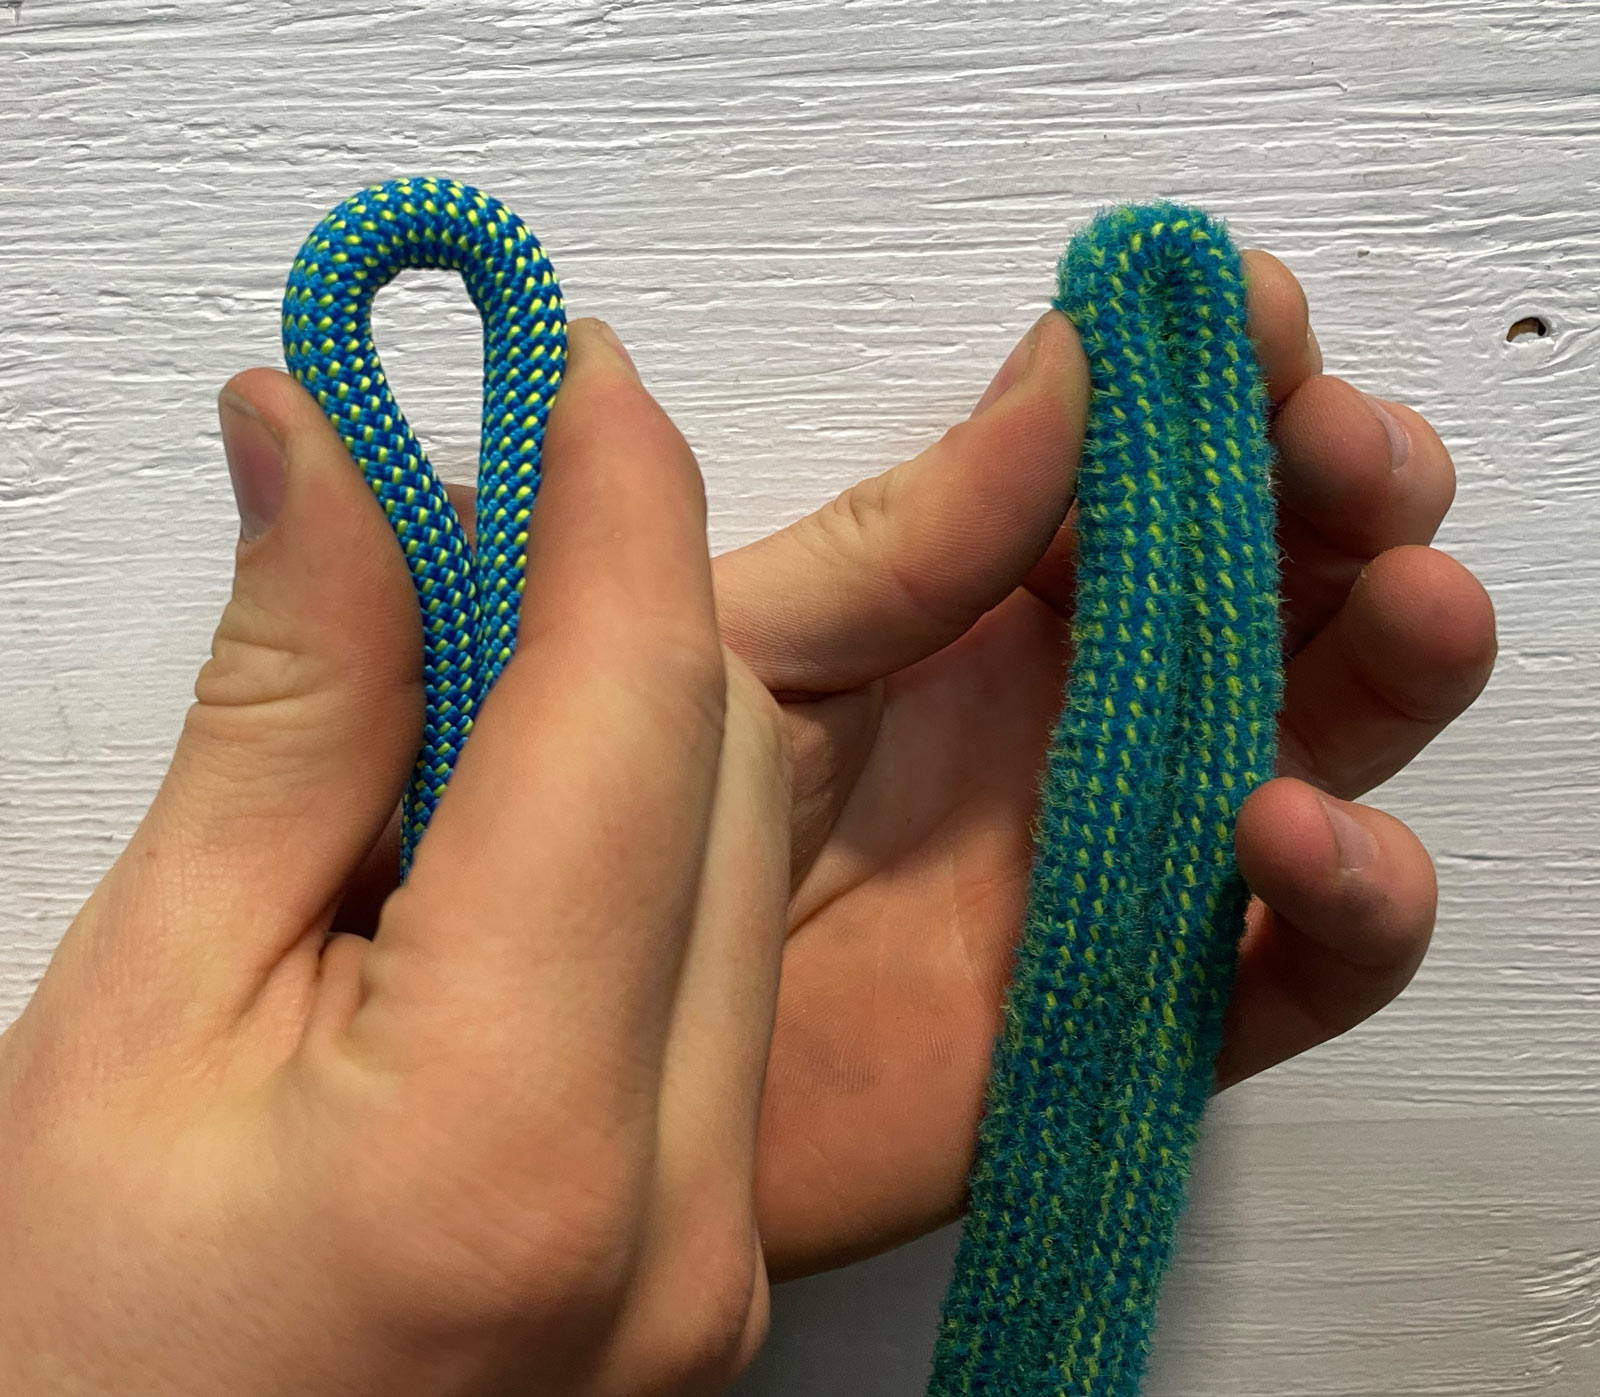 image of Pinch Test on a New Rope vs. Old Rope